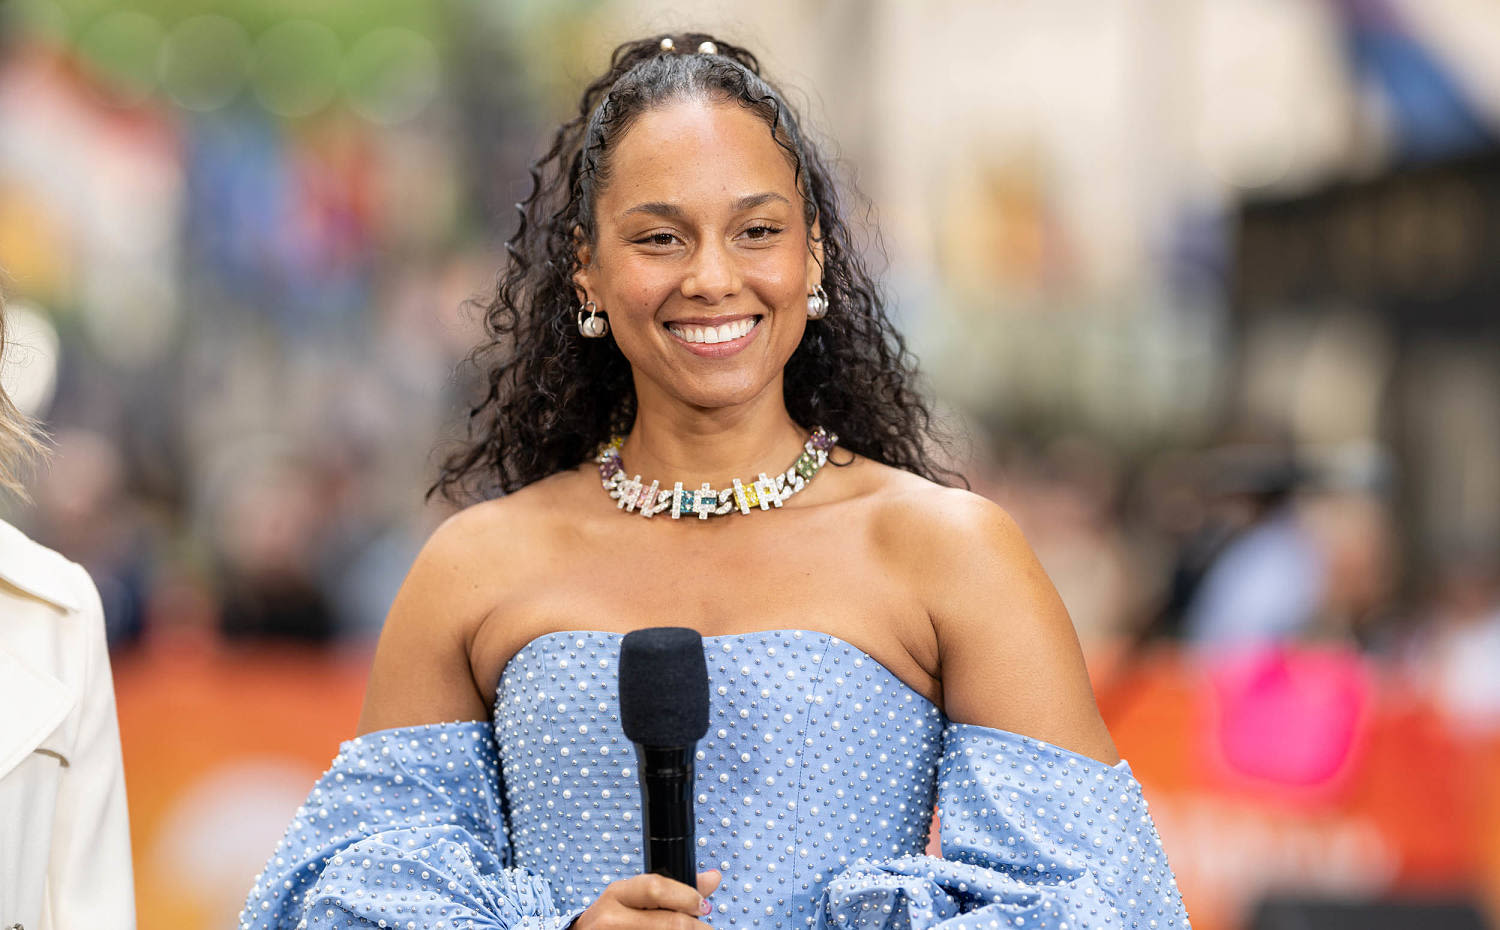 Alicia Keys explained how her real childhood inspired Broadway’s ‘Hell's Kitchen’